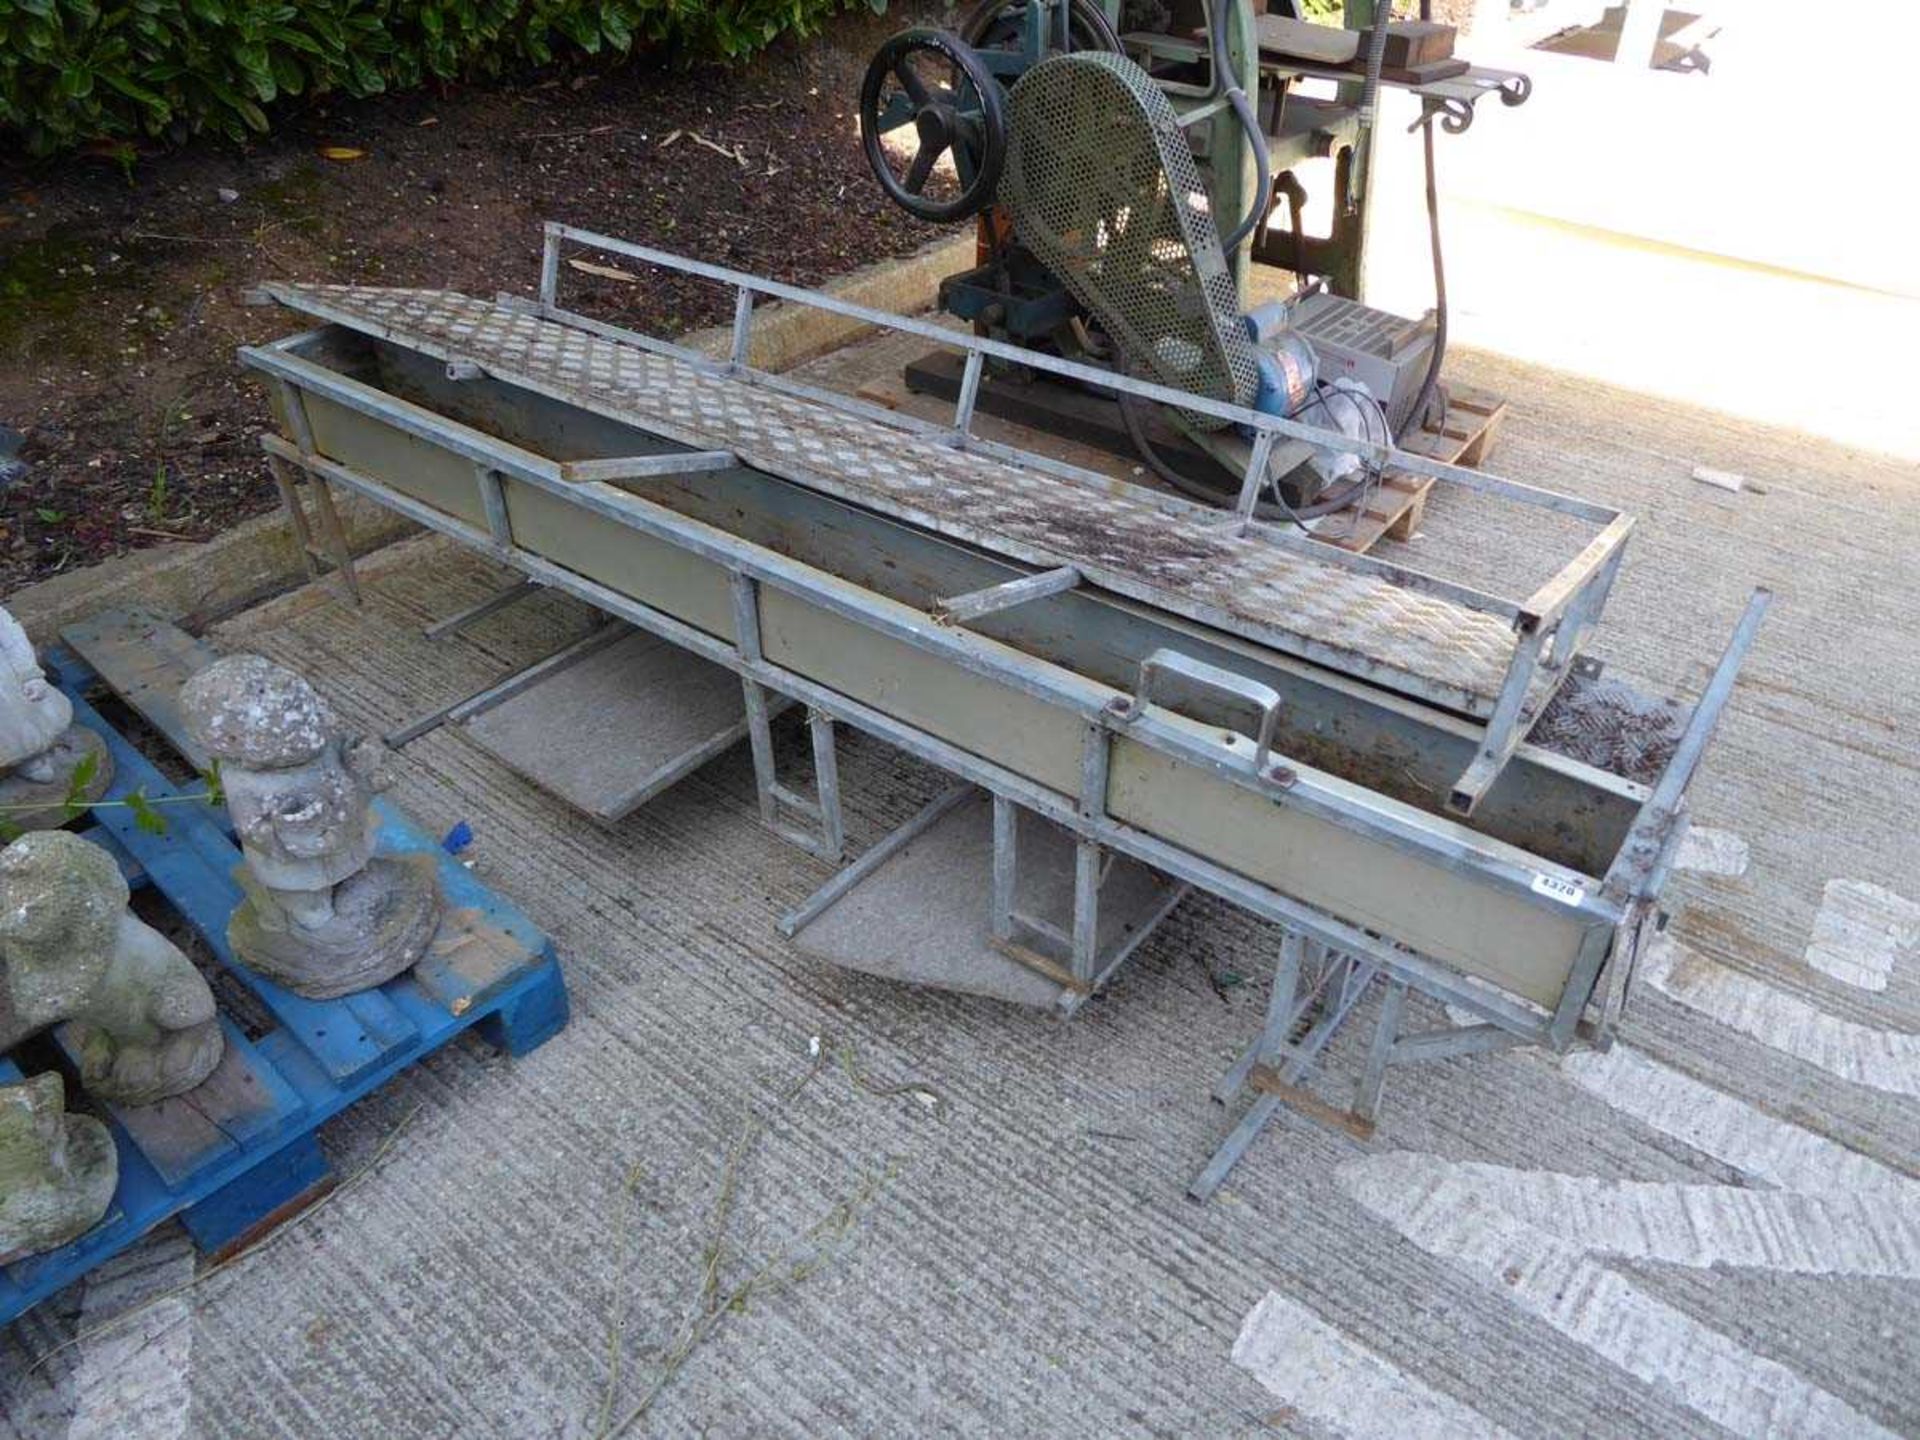 Landrover galvanised Explorer roof rack (cut in three sections)